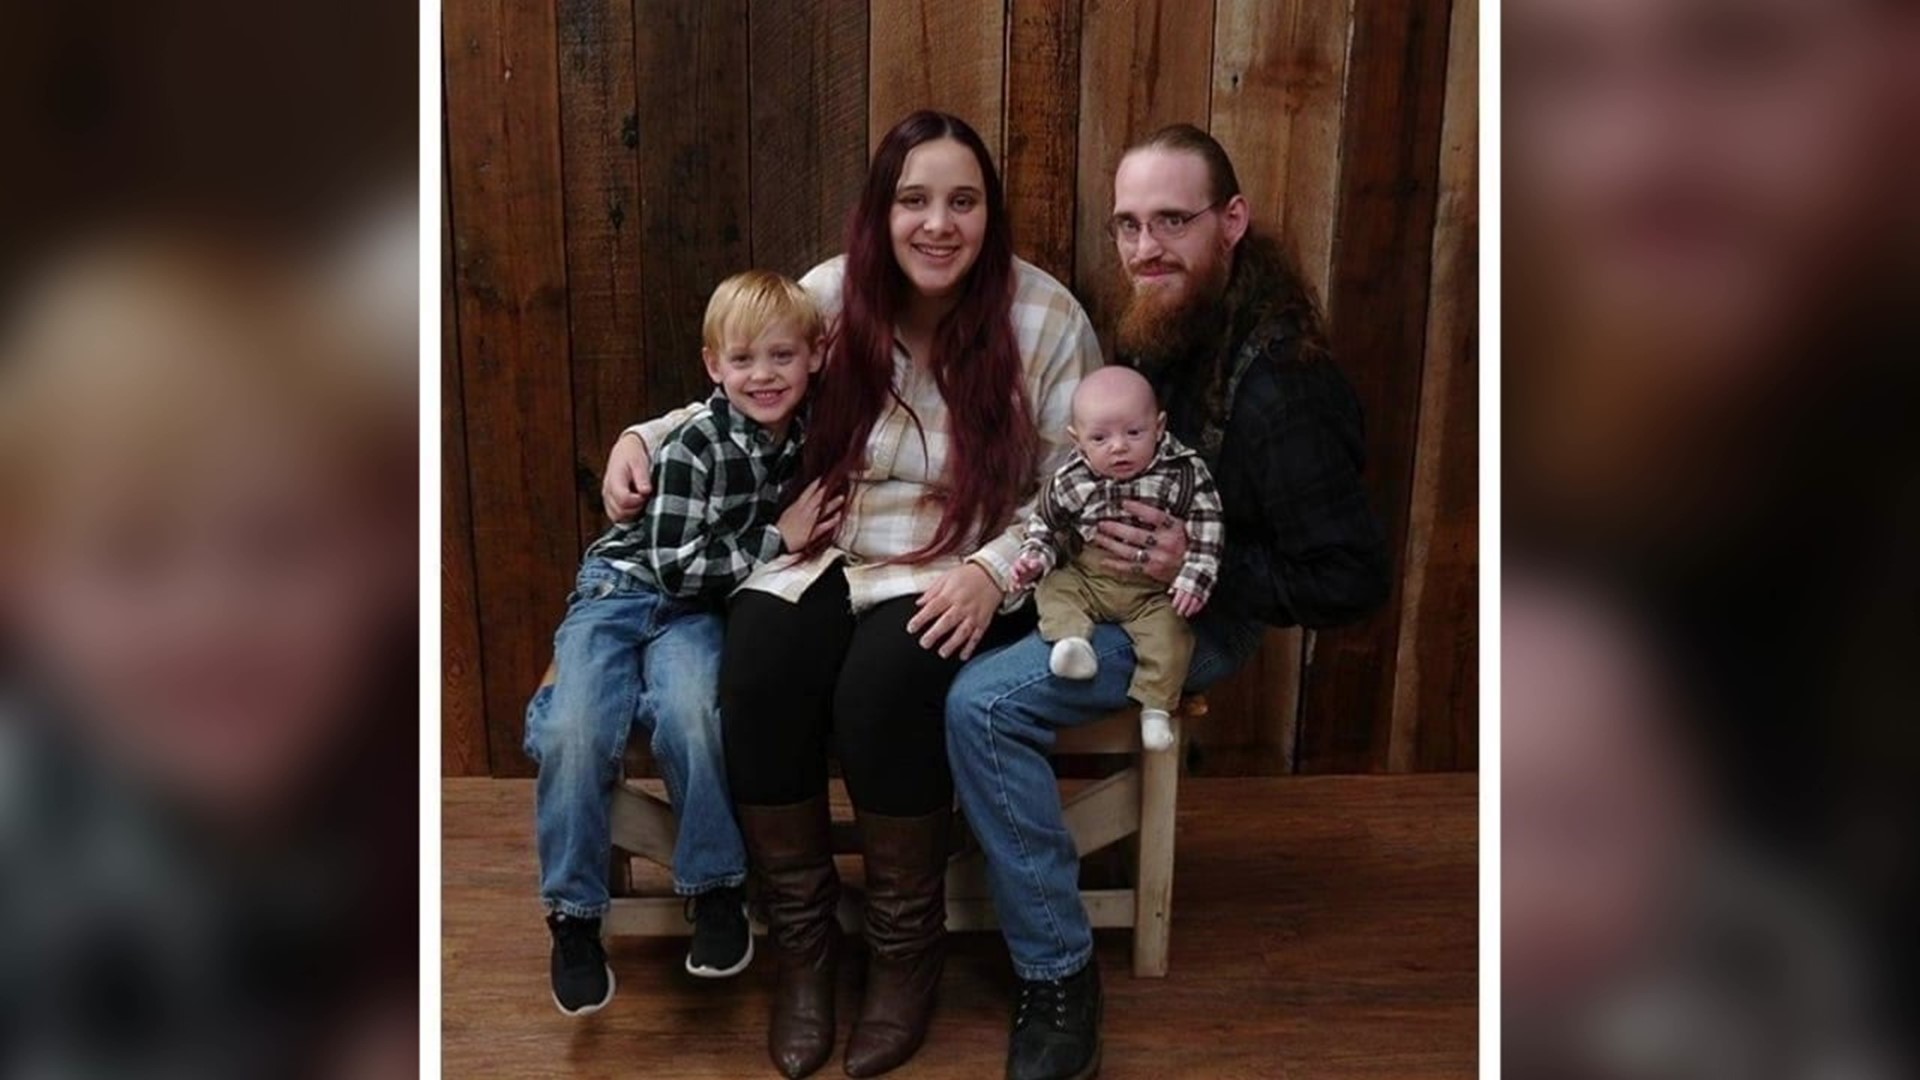 The father of three died trying to save his wife and kids.